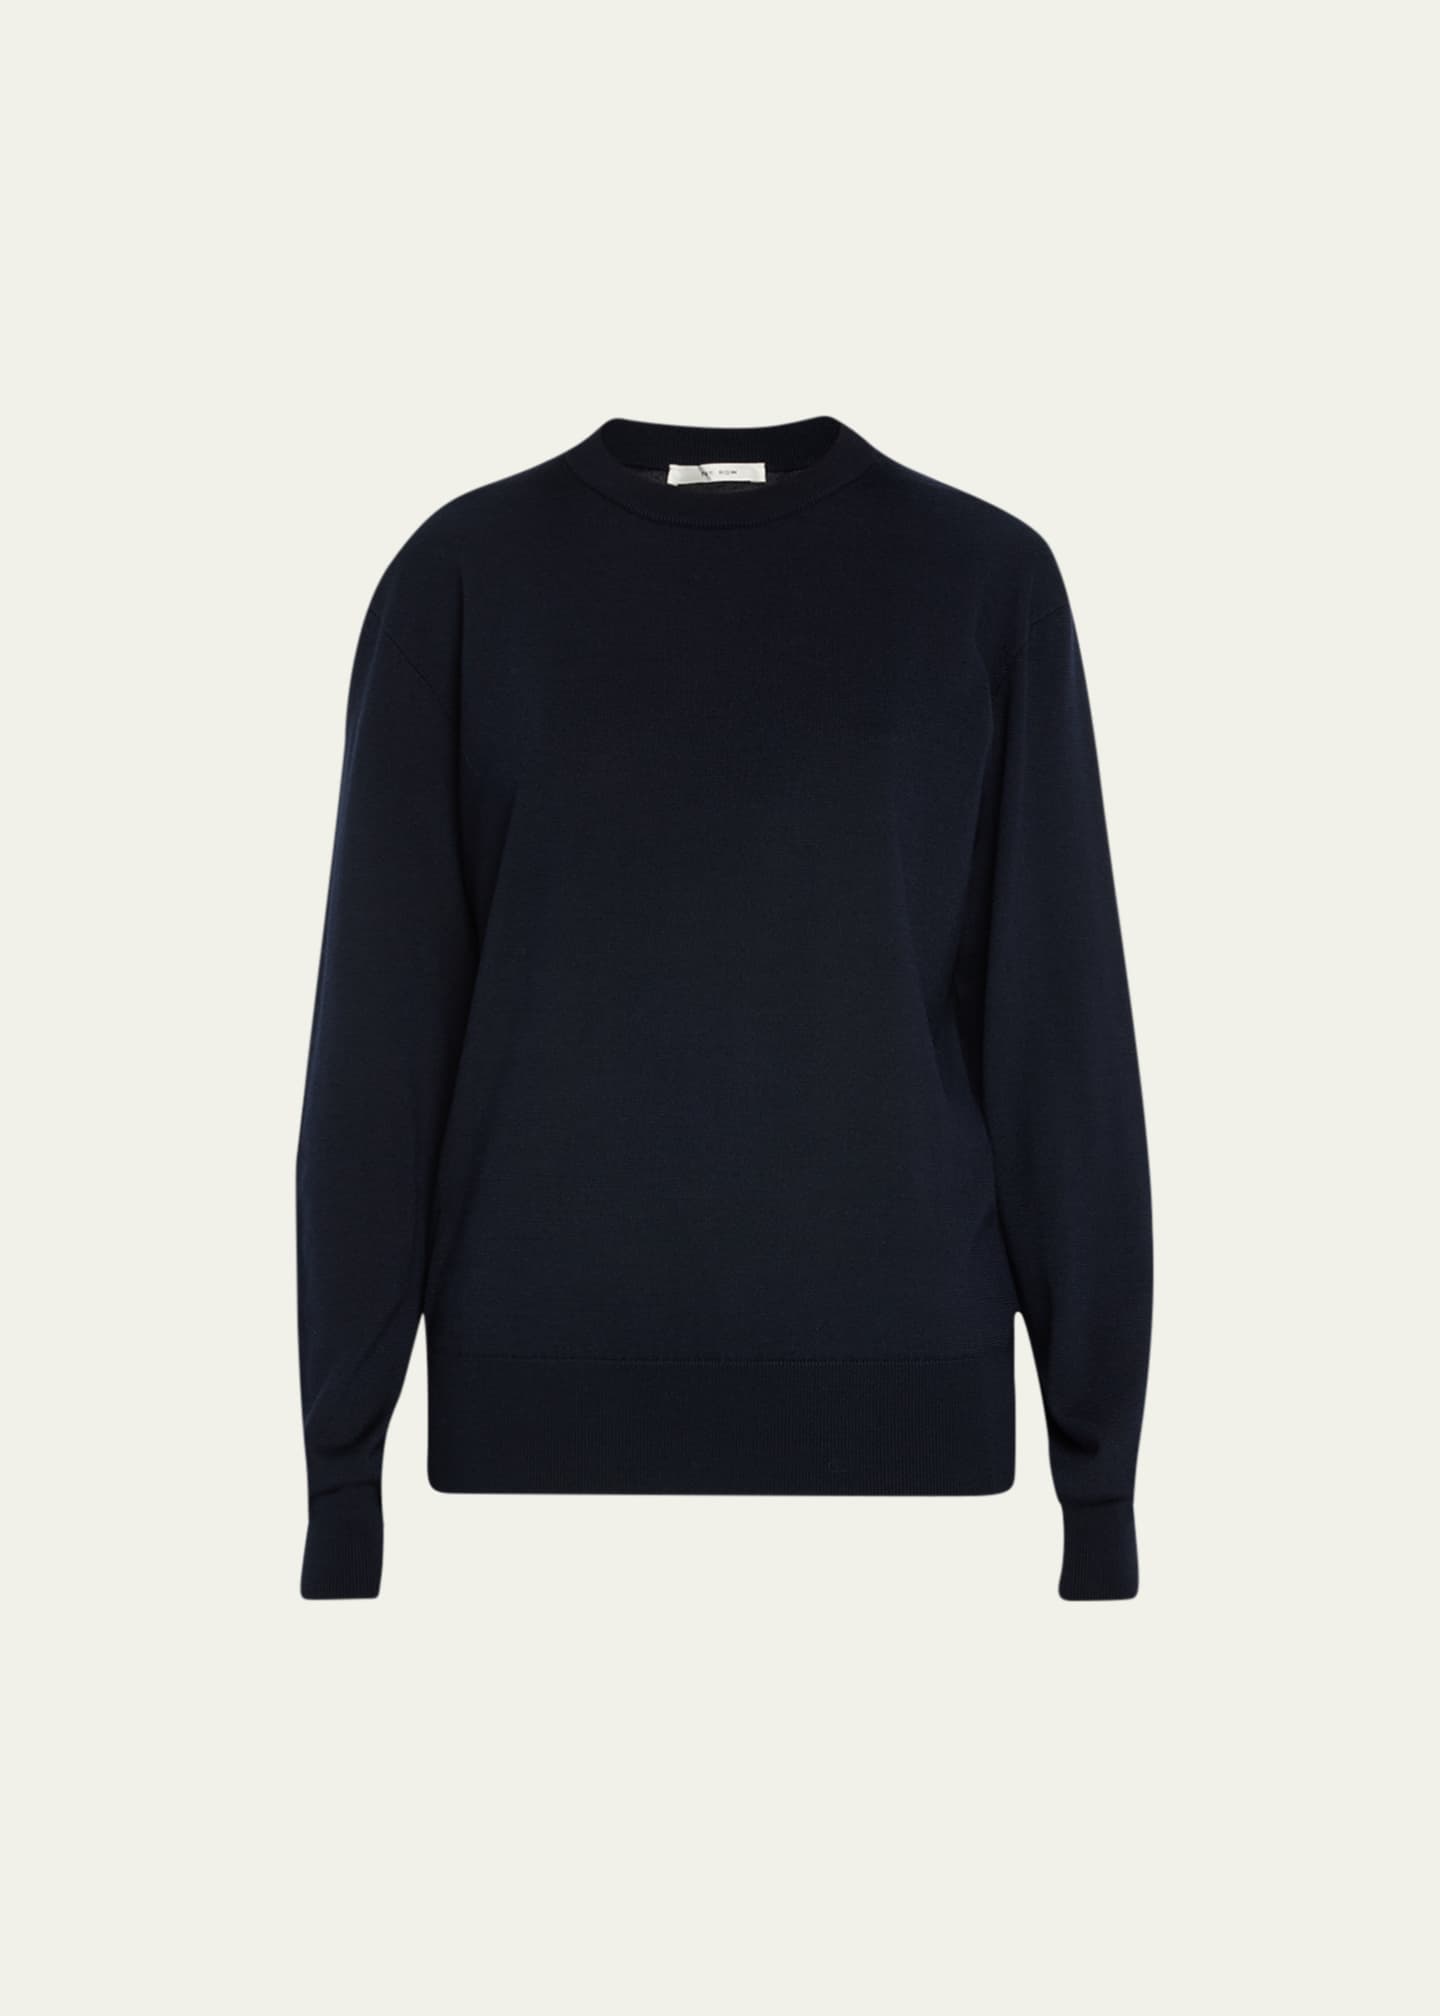 THE ROW Druyes Wool Cashmere Top - Bergdorf Goodman